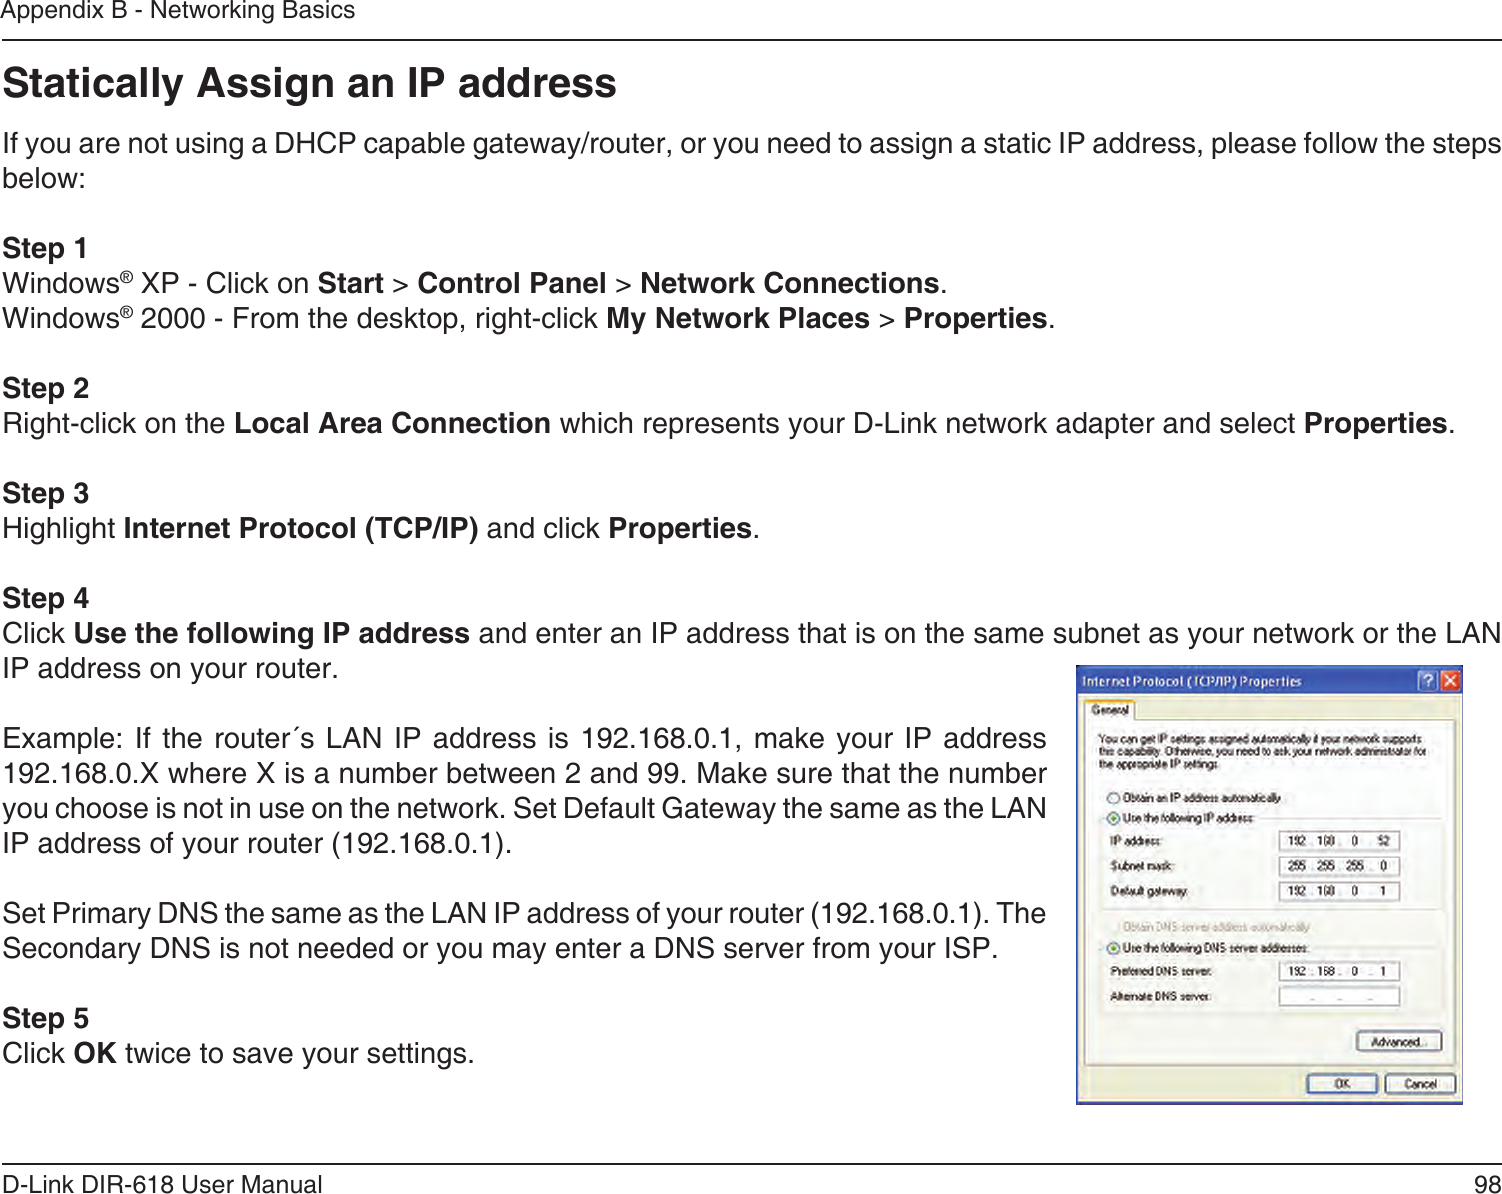 98D-Link DIR-618 User ManualAppendix B - Networking BasicsStatically Assign an IP addressIf you are not using a DHCP capable gateway/router, or you need to assign a static IP address, please follow the steps below:Step 1Windows® XP - Click on Start &gt; Control Panel &gt; Network Connections.Windows® 2000 - From the desktop, right-click My Network Places &gt; Properties.Step 2Right-click on the Local Area Connection which represents your D-Link network adapter and select Properties.Step 3Highlight Internet Protocol (TCP/IP) and click Properties.Step 4Click Use the following IP address and enter an IP address that is on the same subnet as your network or the LANIP address on your router. Example: If the router´s LAN IP address is 192.168.0.1, make your IP address 192.168.0.X where X is a number between 2 and 99. Make sure that the numberyou choose is not in use on the network. Set Default Gateway the same as the LANIP address of your router (192.168.0.1). Set Primary DNS the same as the LAN IP address of your router (192.168.0.1). TheSecondary DNS is not needed or you may enter a DNS server from your ISP.Step 5Click OK twice to save your settings.